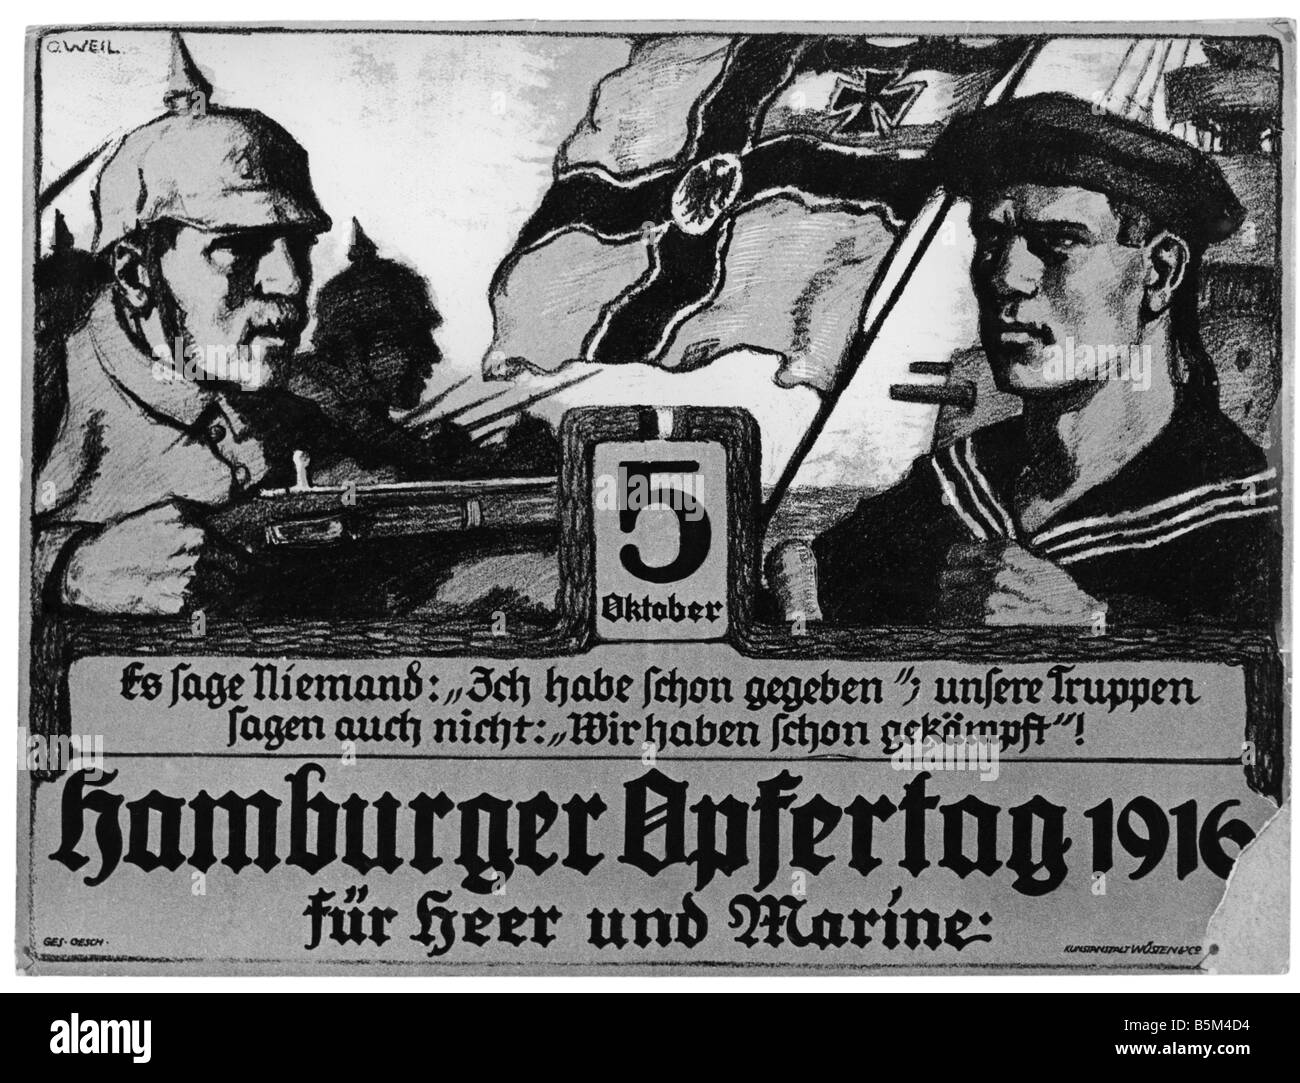 events, First World War / WWI, propaganda, 'Hamburger Opfertag für Heer und Marine' (Hamburg day of sacrifice 1916 for the benefit of army and navy), drawing, by O. Weil, Germany, 1916, Stock Photo